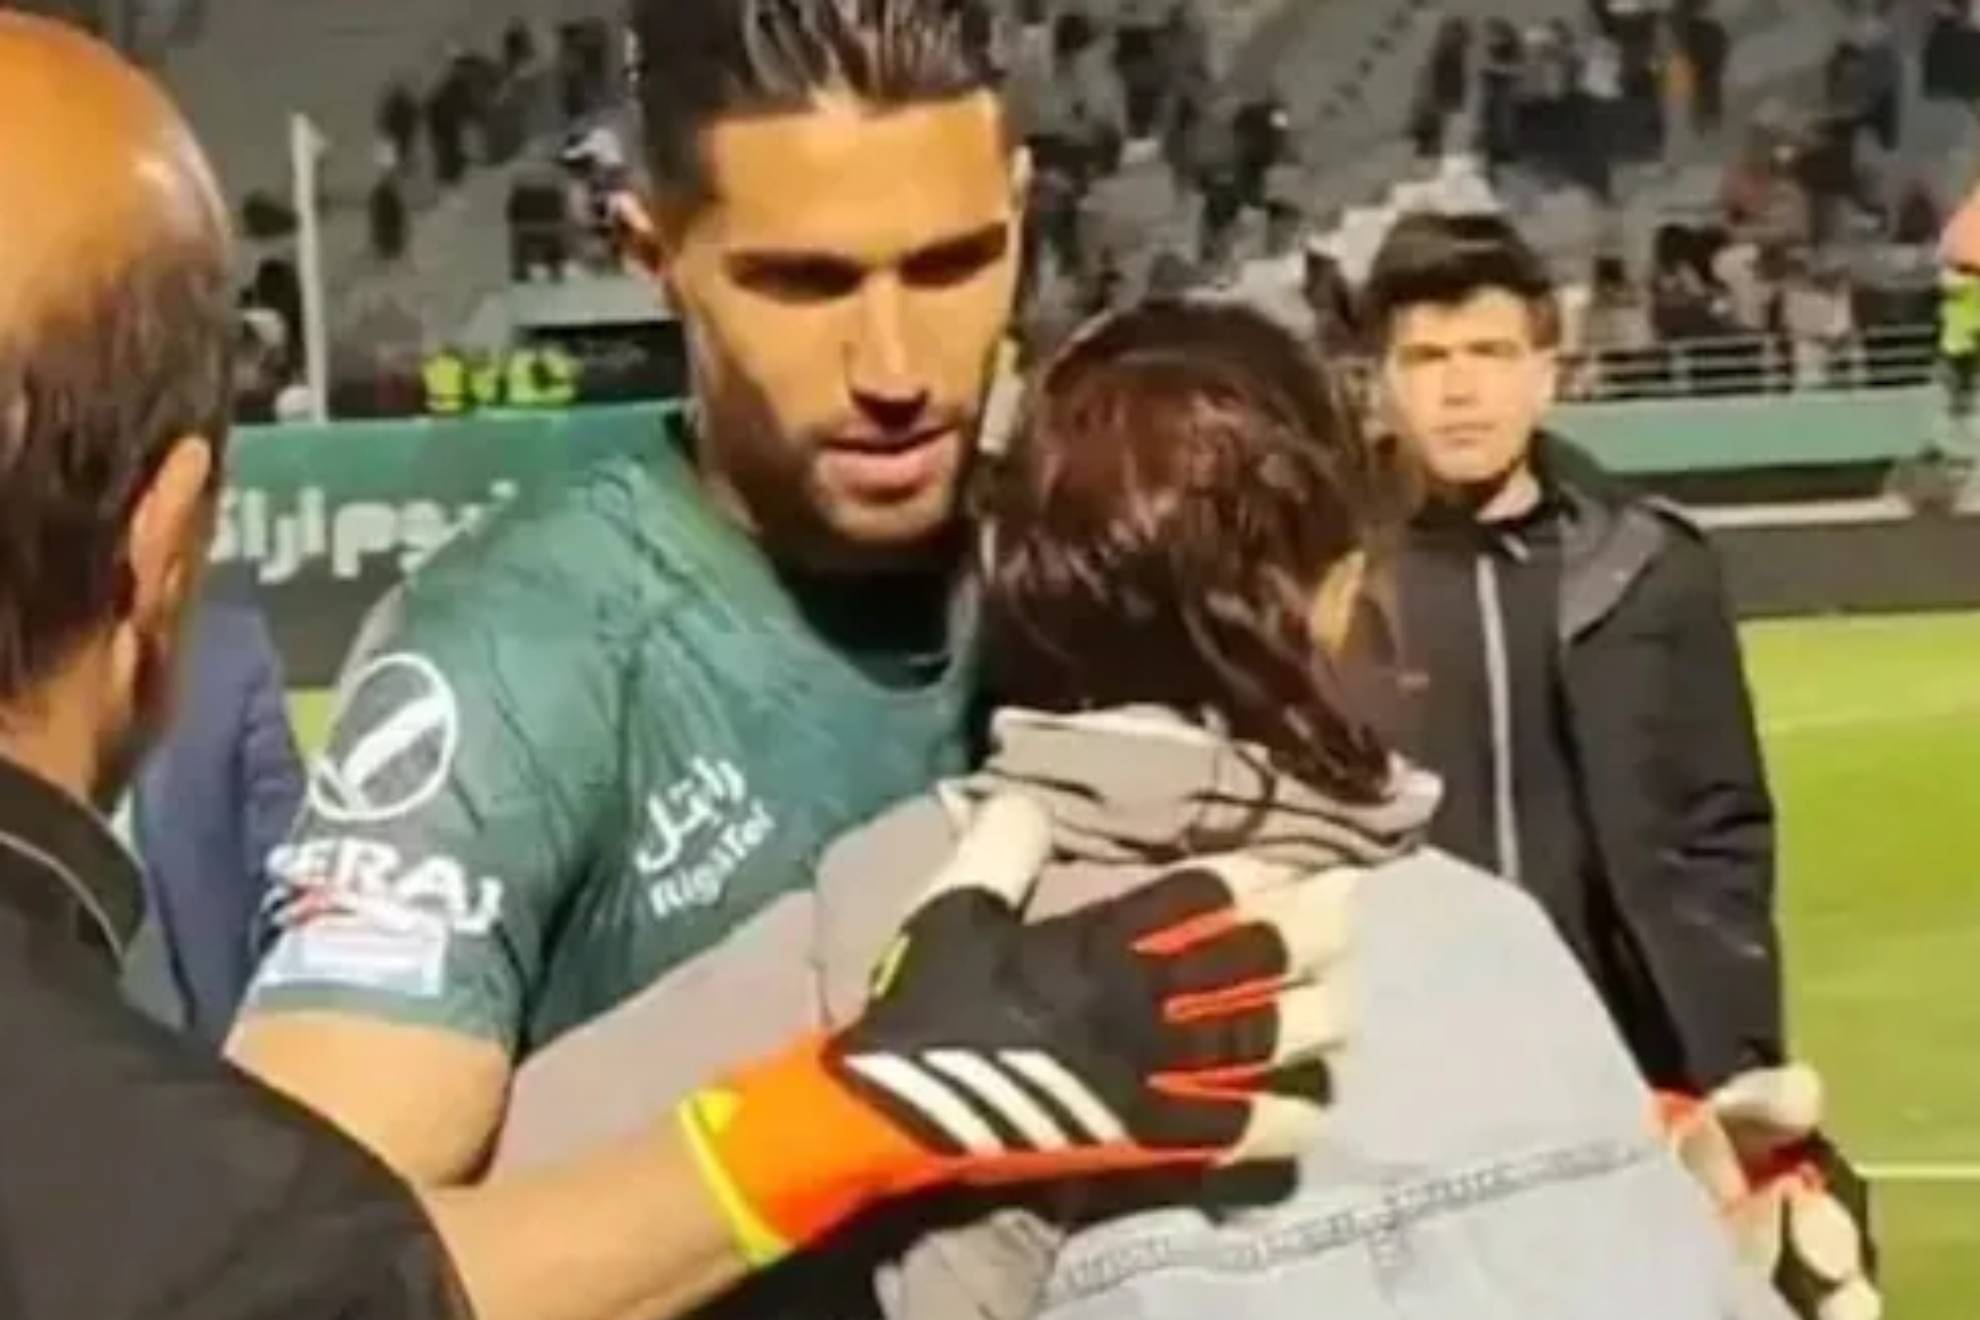 Iran suspends and fines its international goalkeeper after he hugged a woman at the end of a match